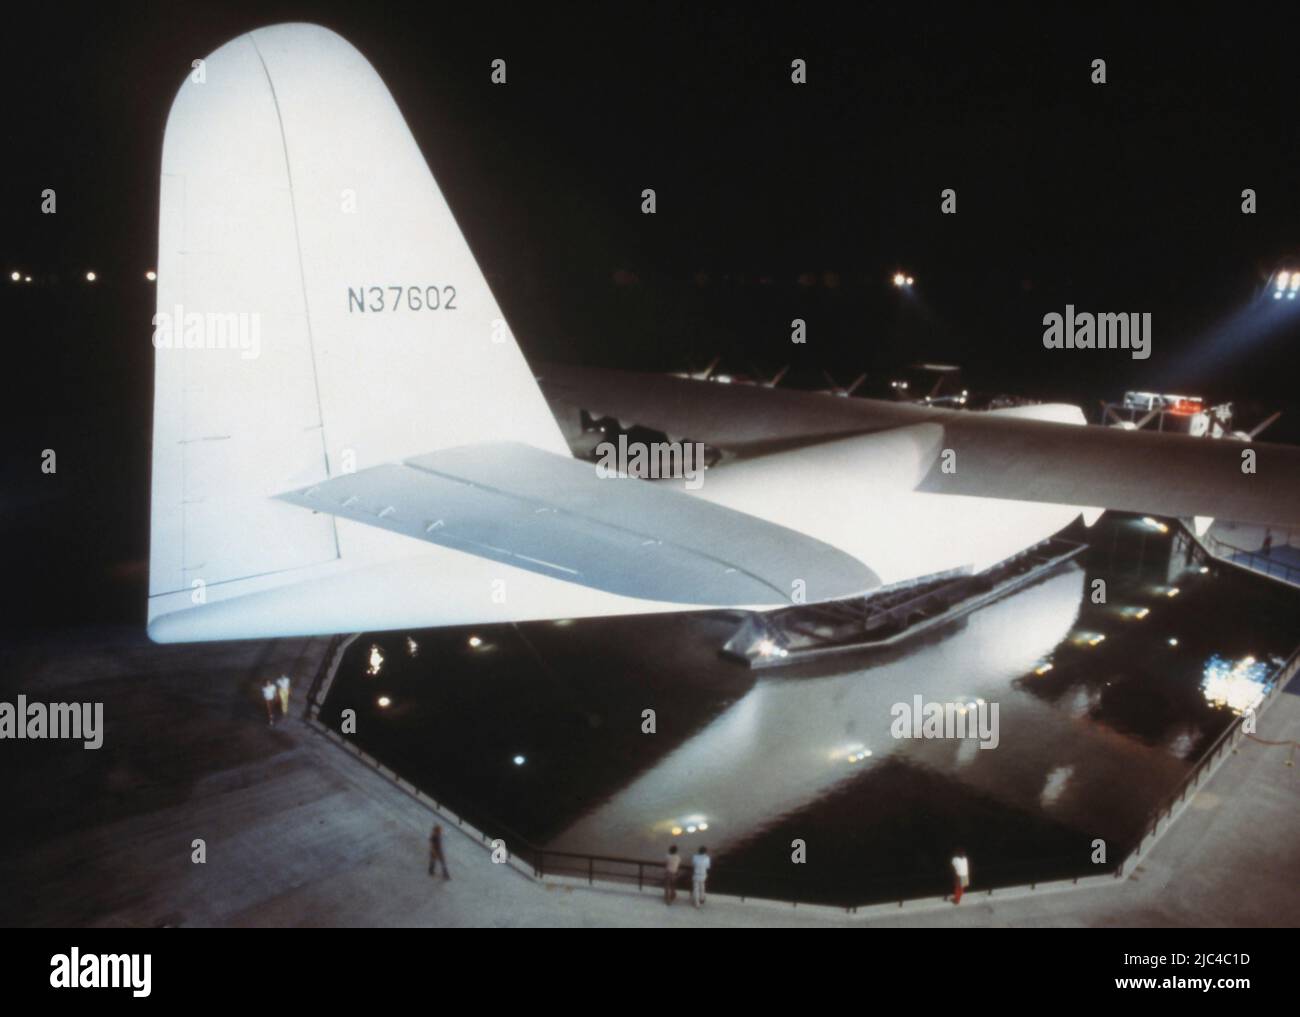 The Spruce Goose on display in Long Beach, California, United States of America Stock Photo